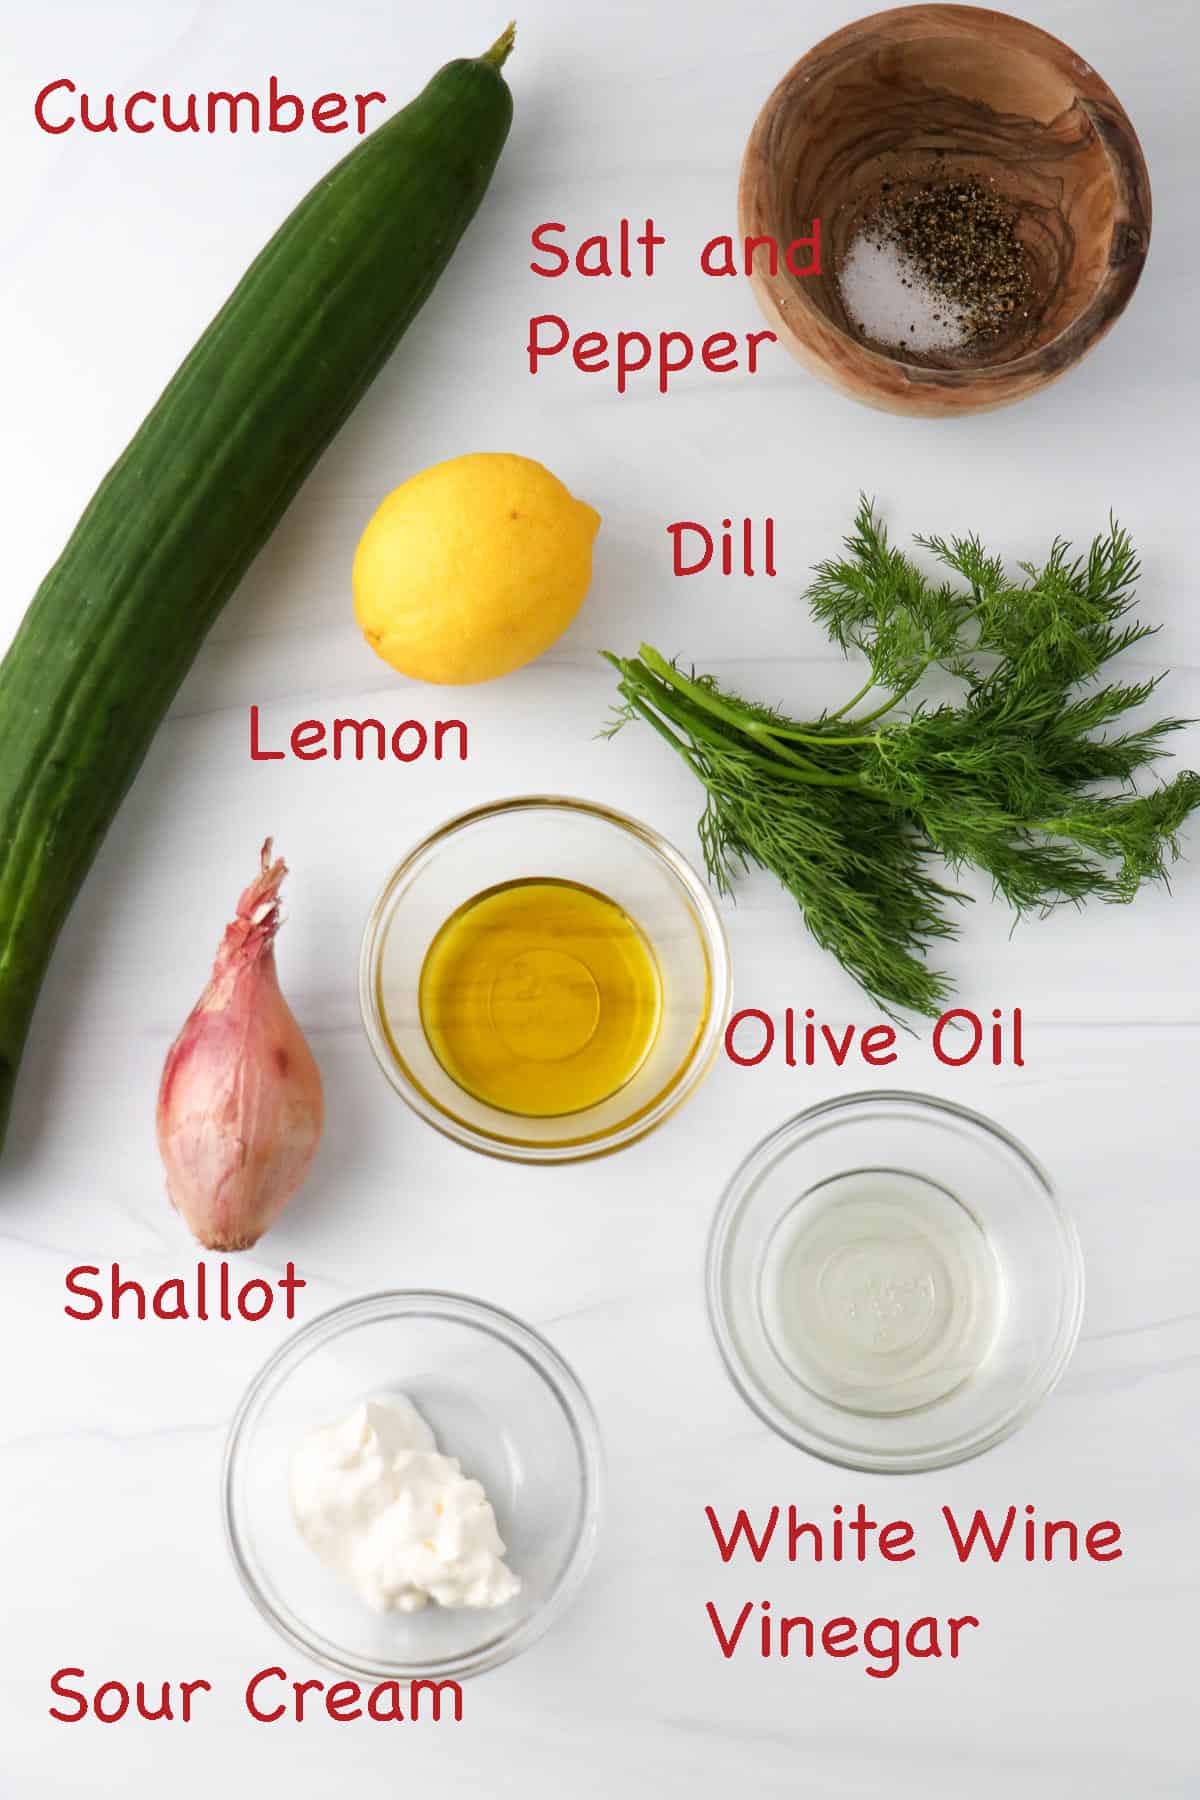 Labeled ingredients for Lemon Cucumber Salad with Dill.